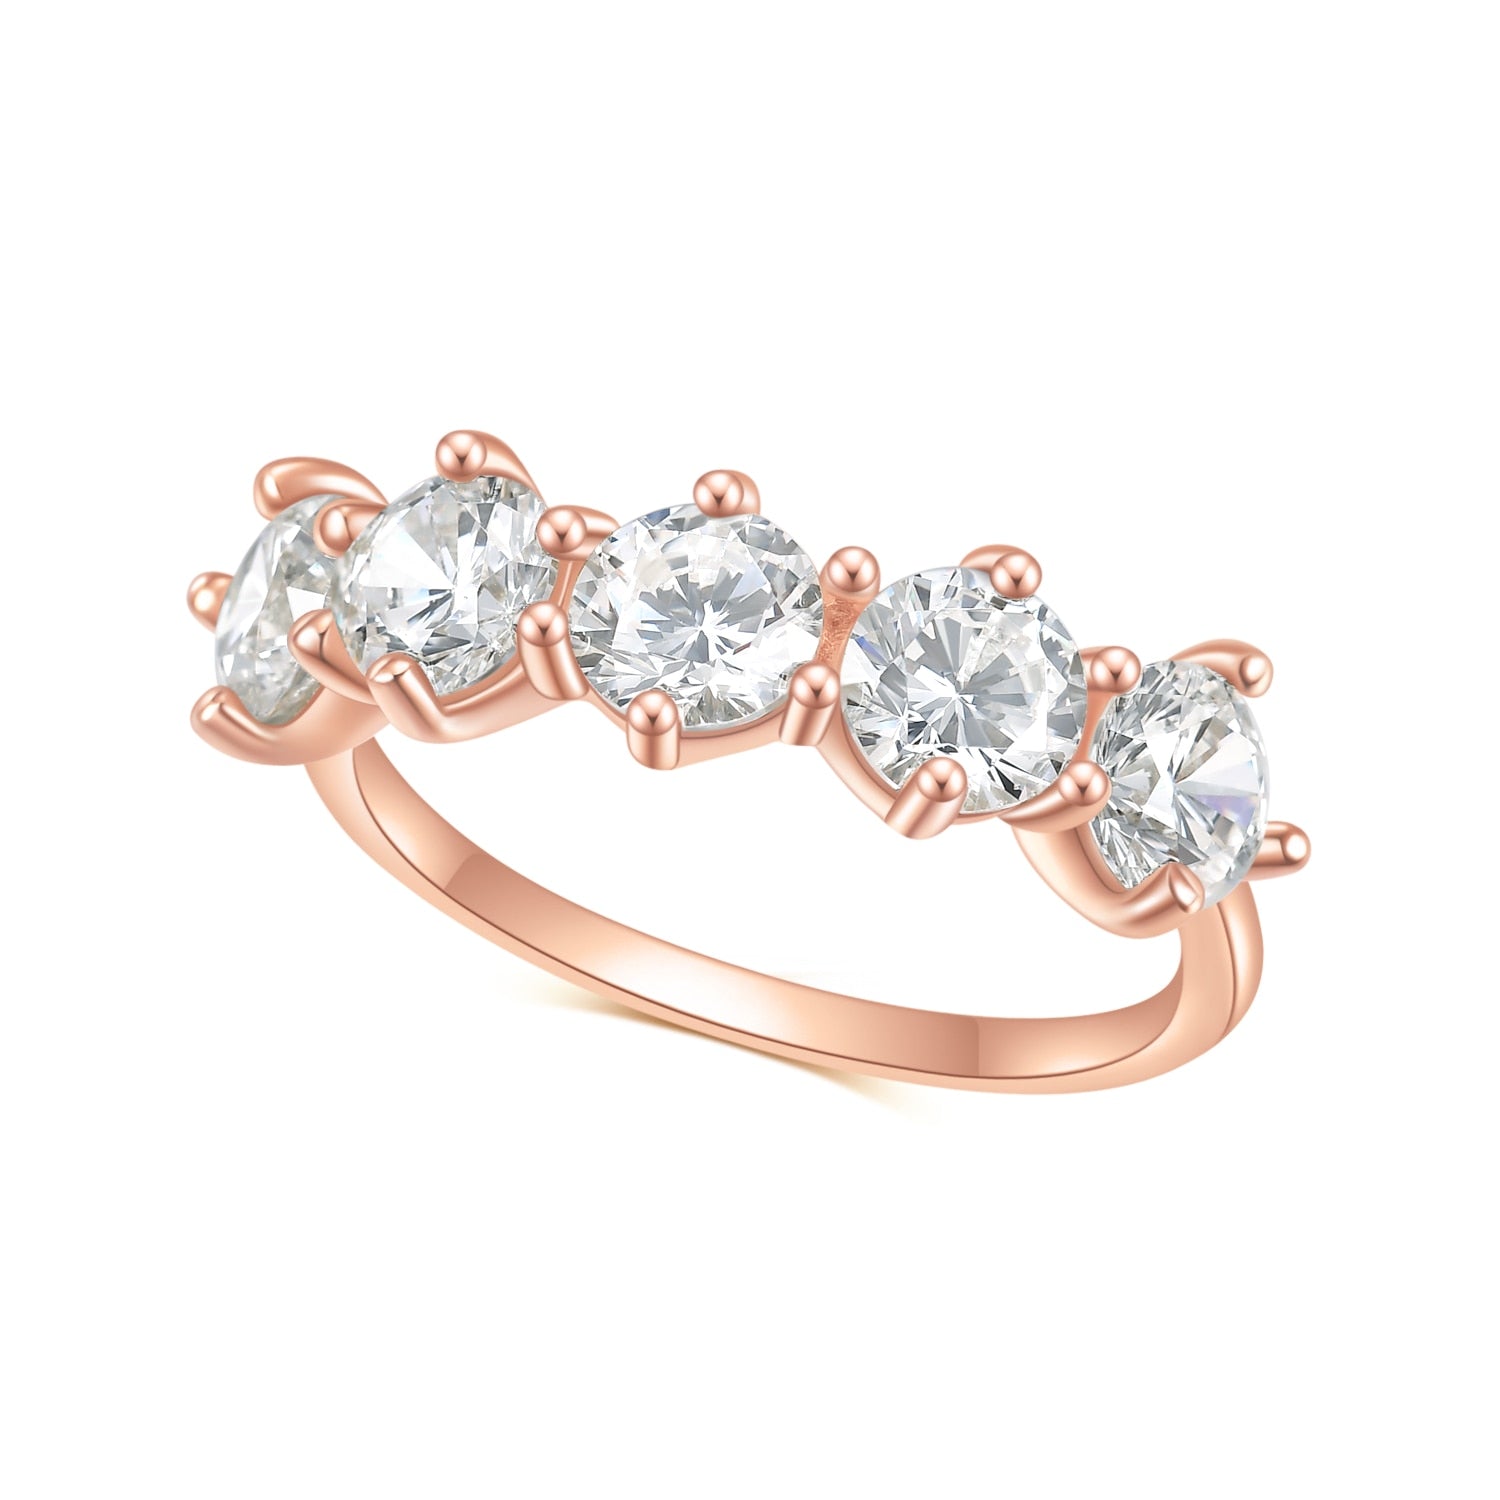 A rose gold ring with 5 half carat round moissanites set horizontally on the band.